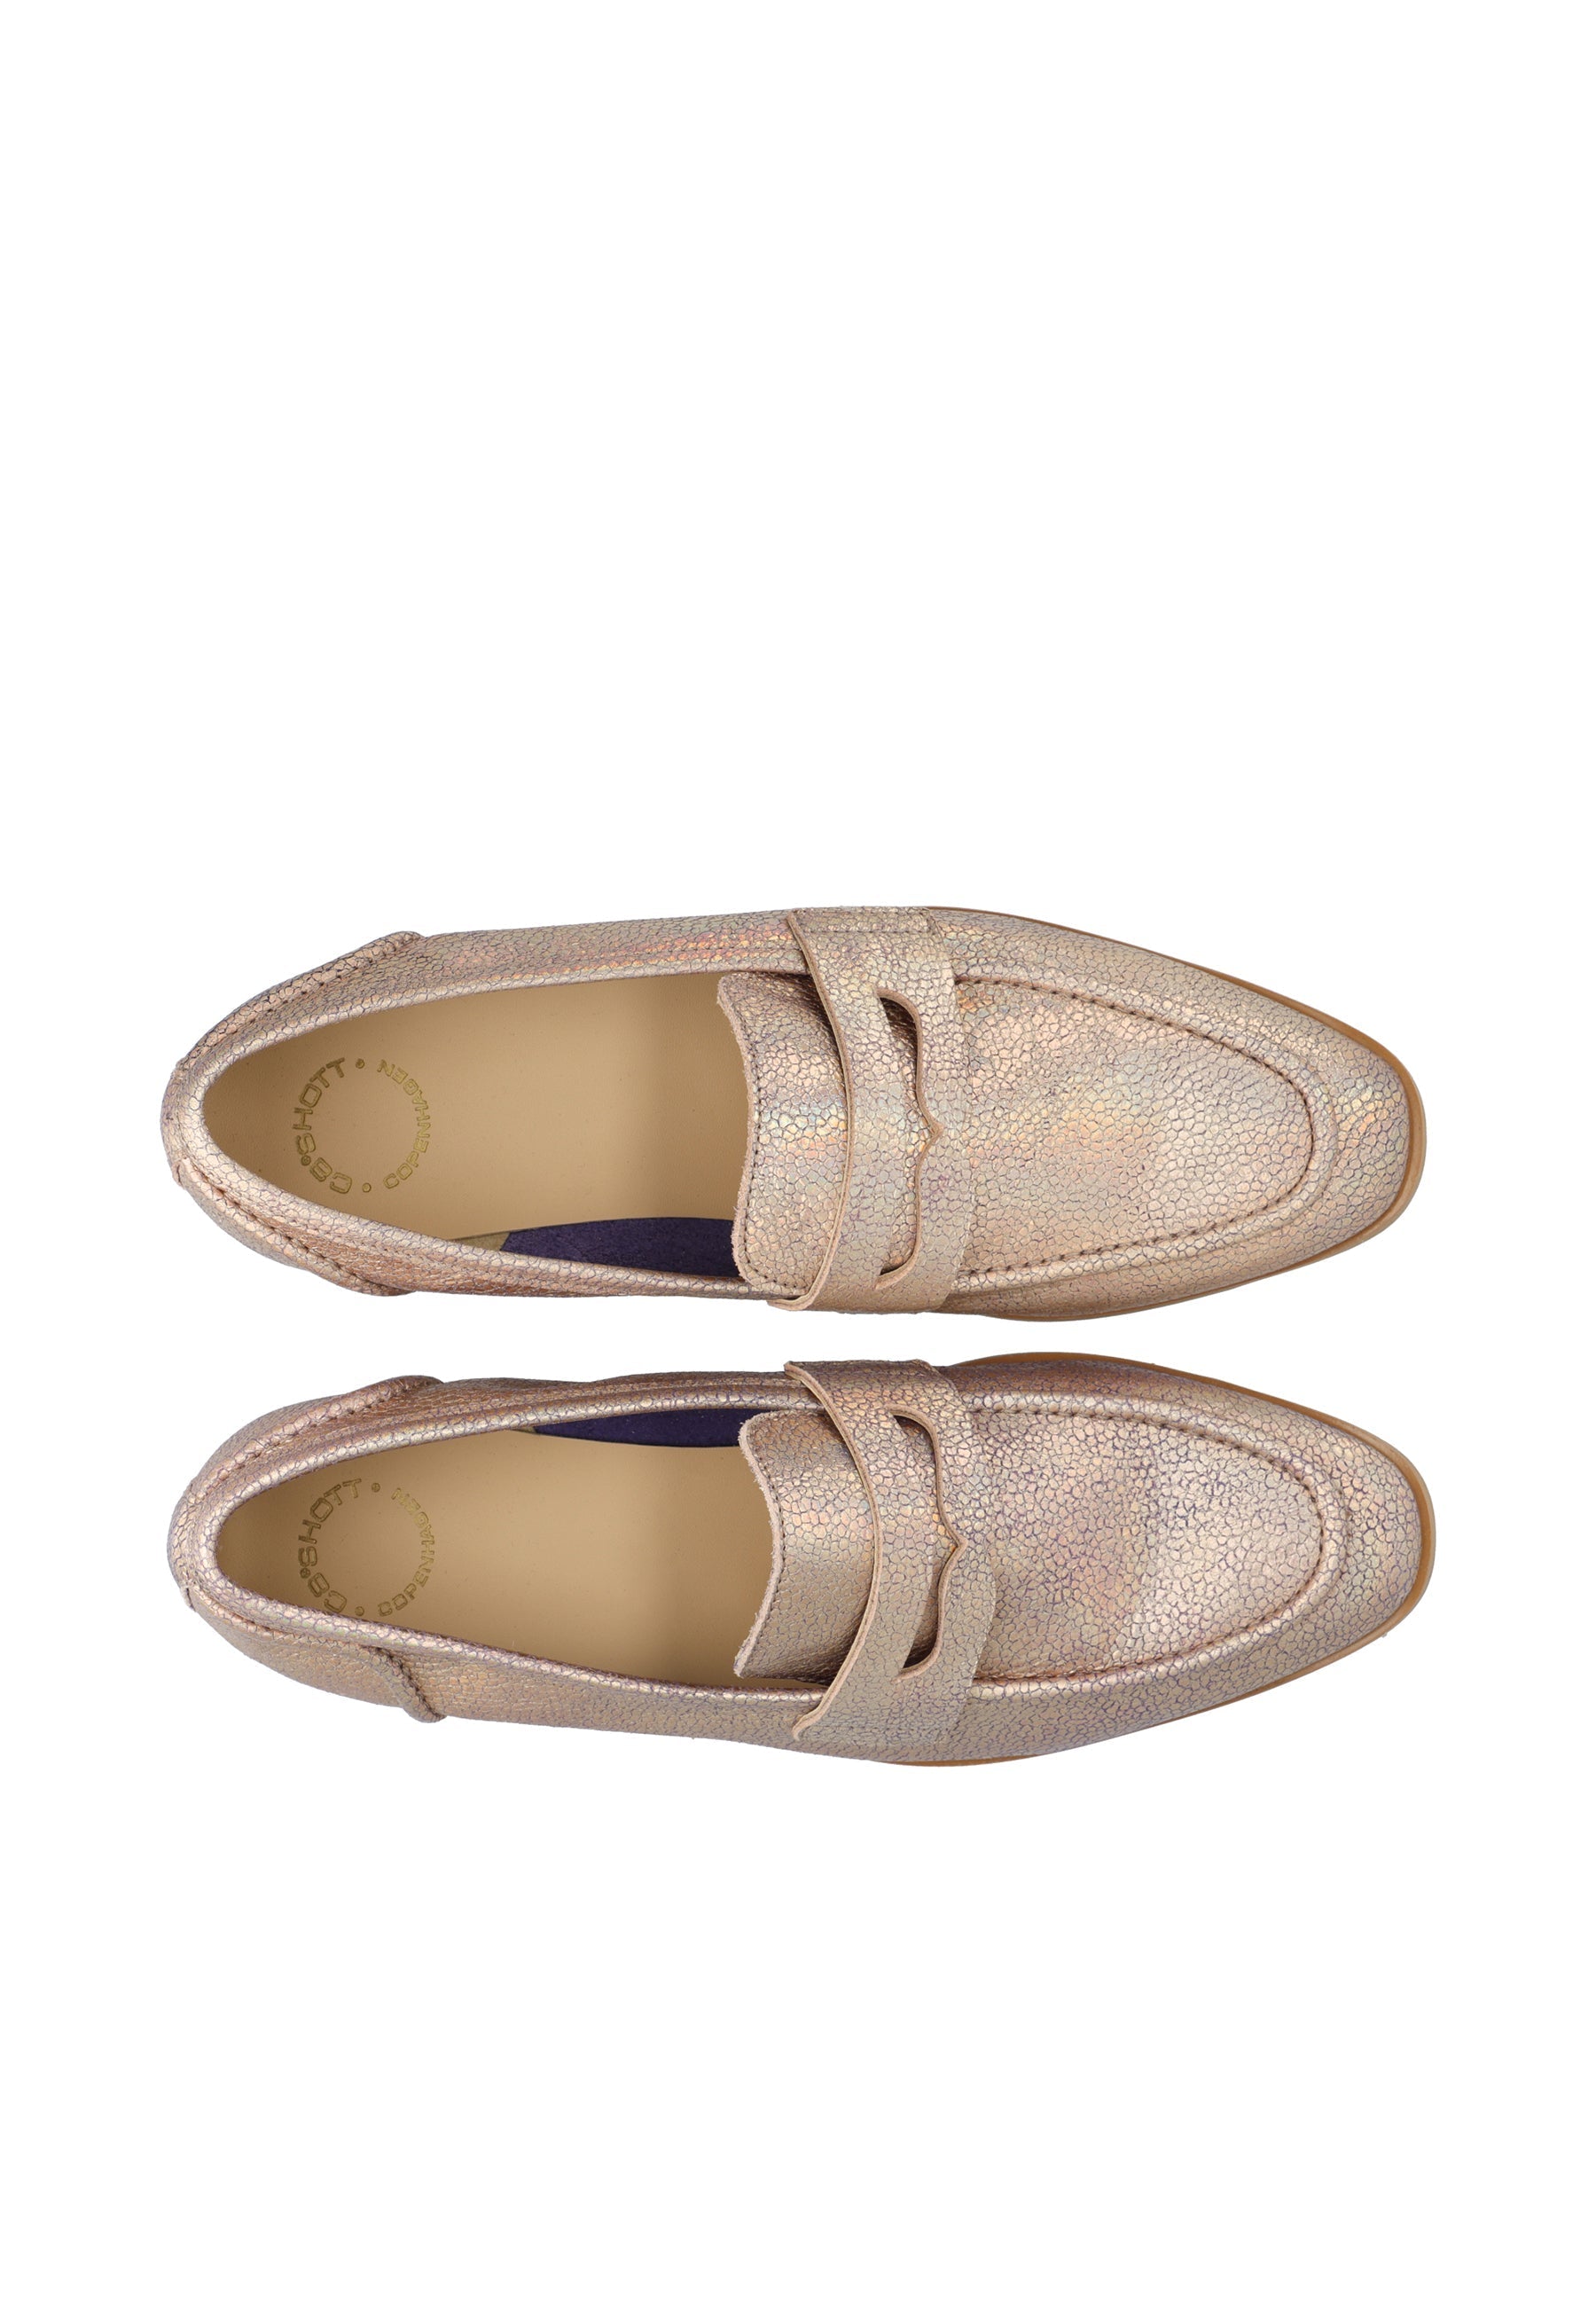 CASHOTT CASMIMMI Penny Loafer Metallic Suede Vegetable Tanned Penny Loafer Multi Colour